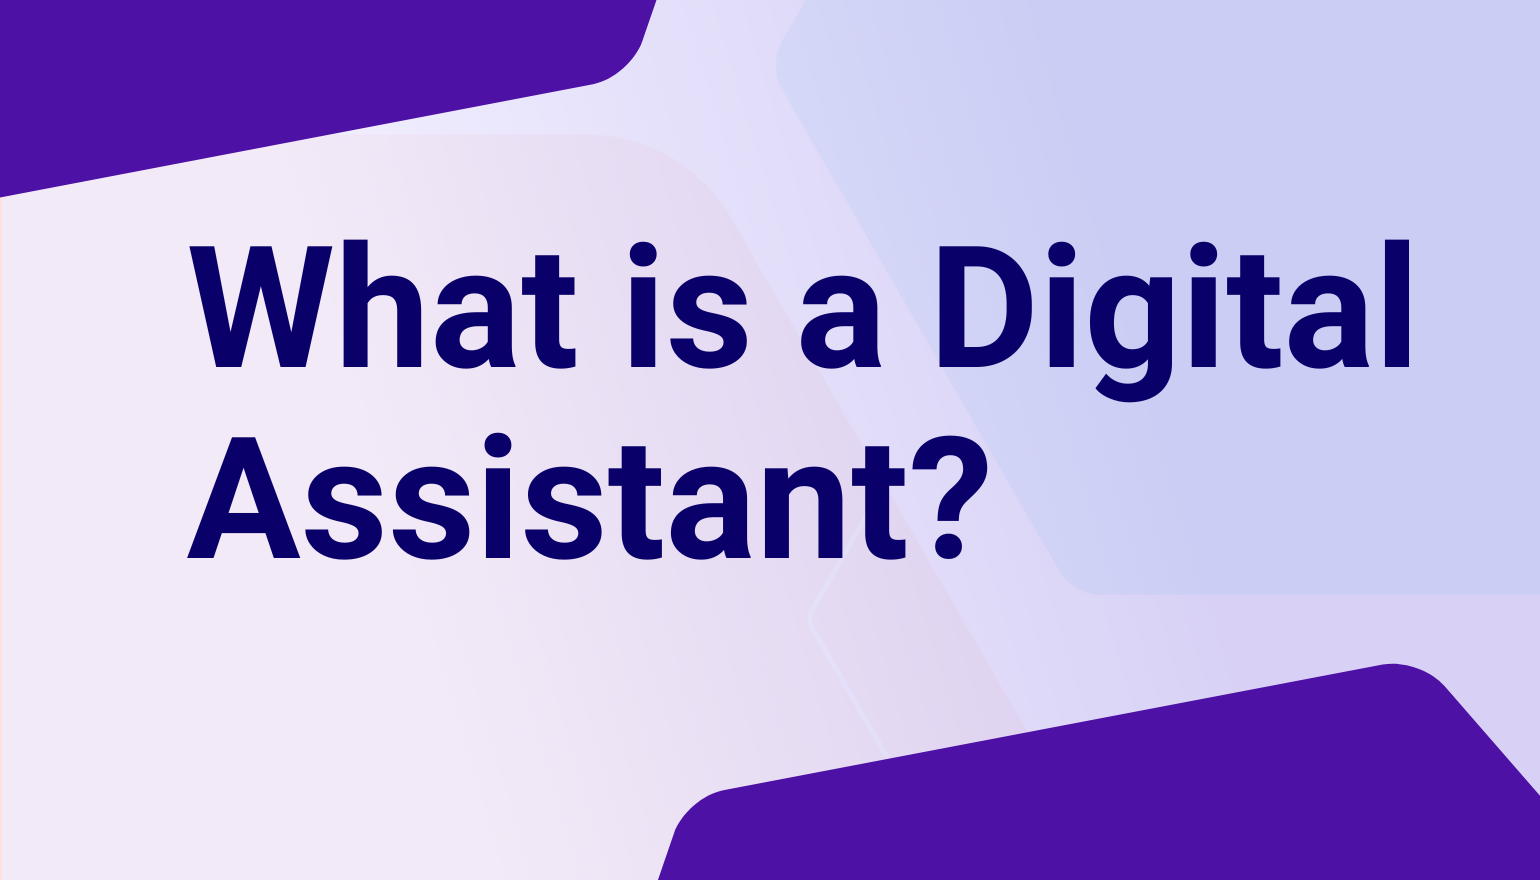 What is a Digital Assistant?